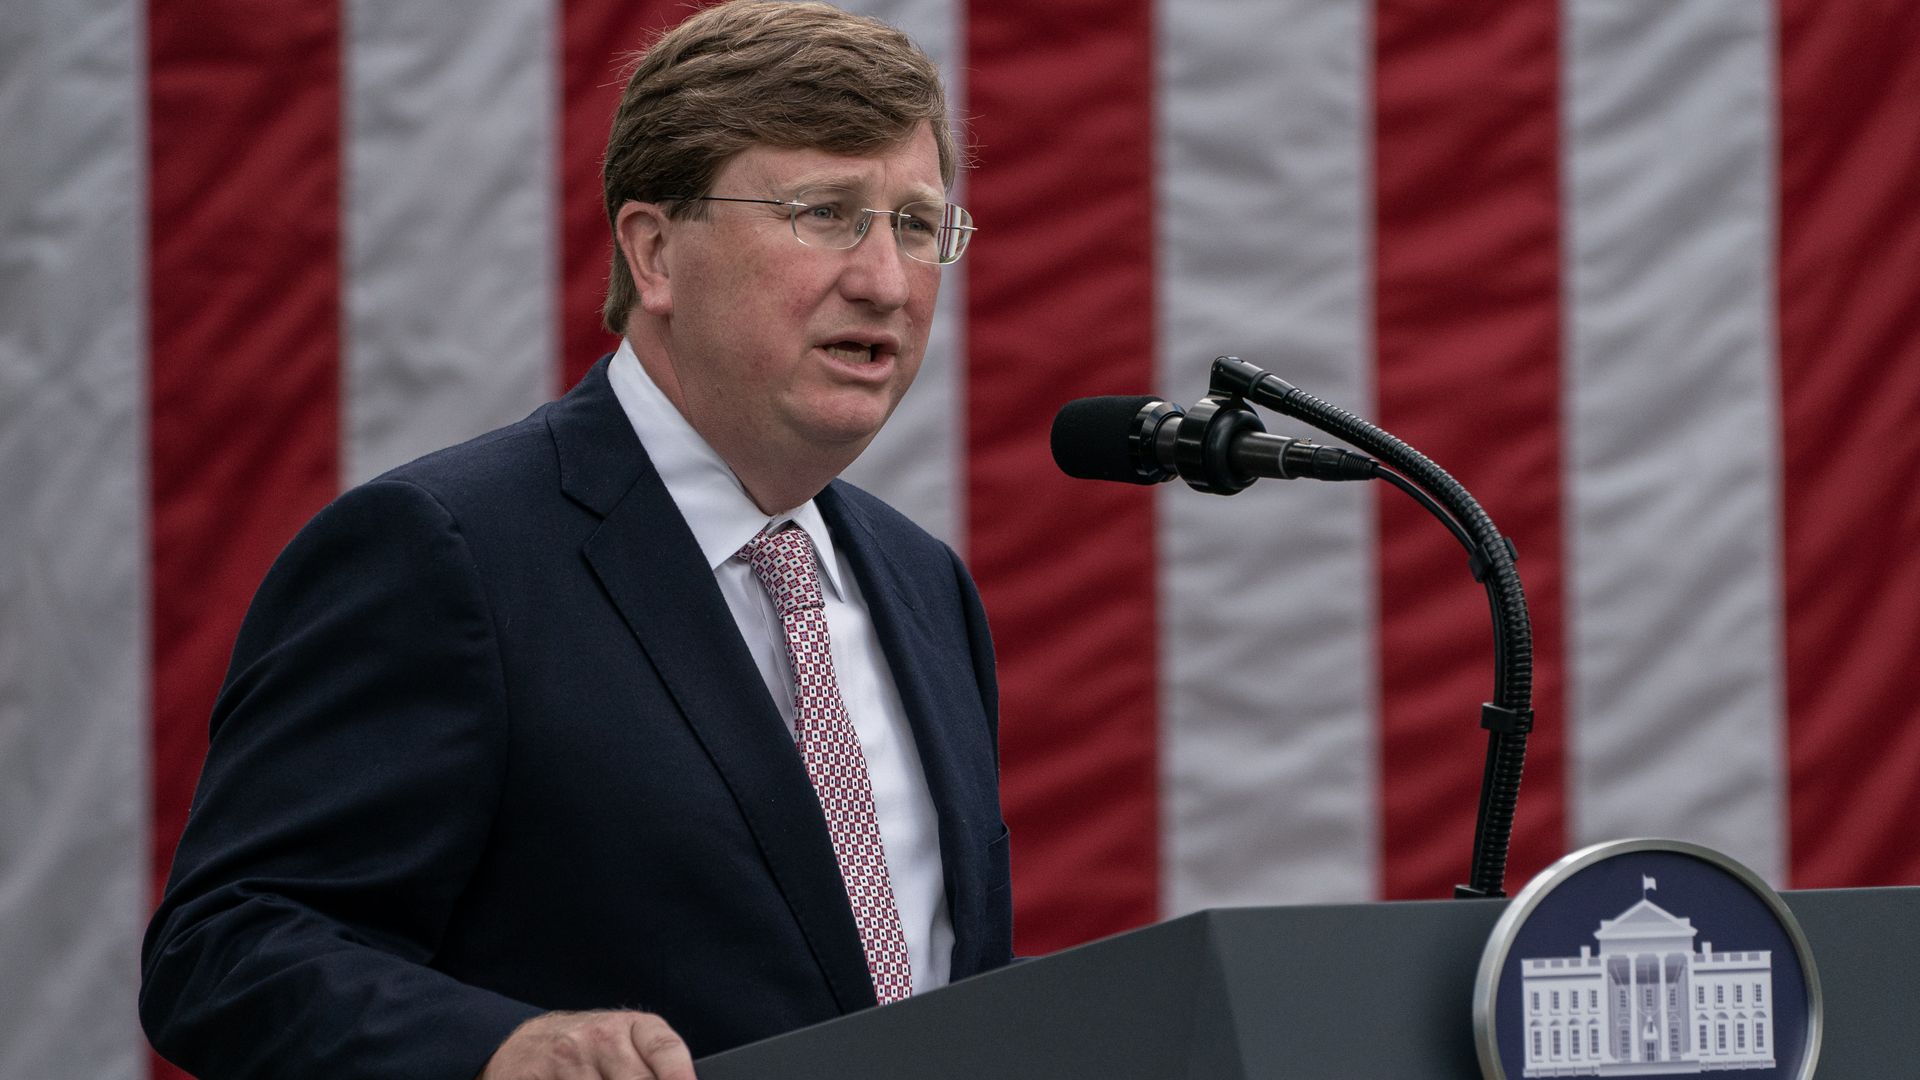 Photo of Tate Reeves speaking into a microphone from behind a podium with the American flag in the backdrop